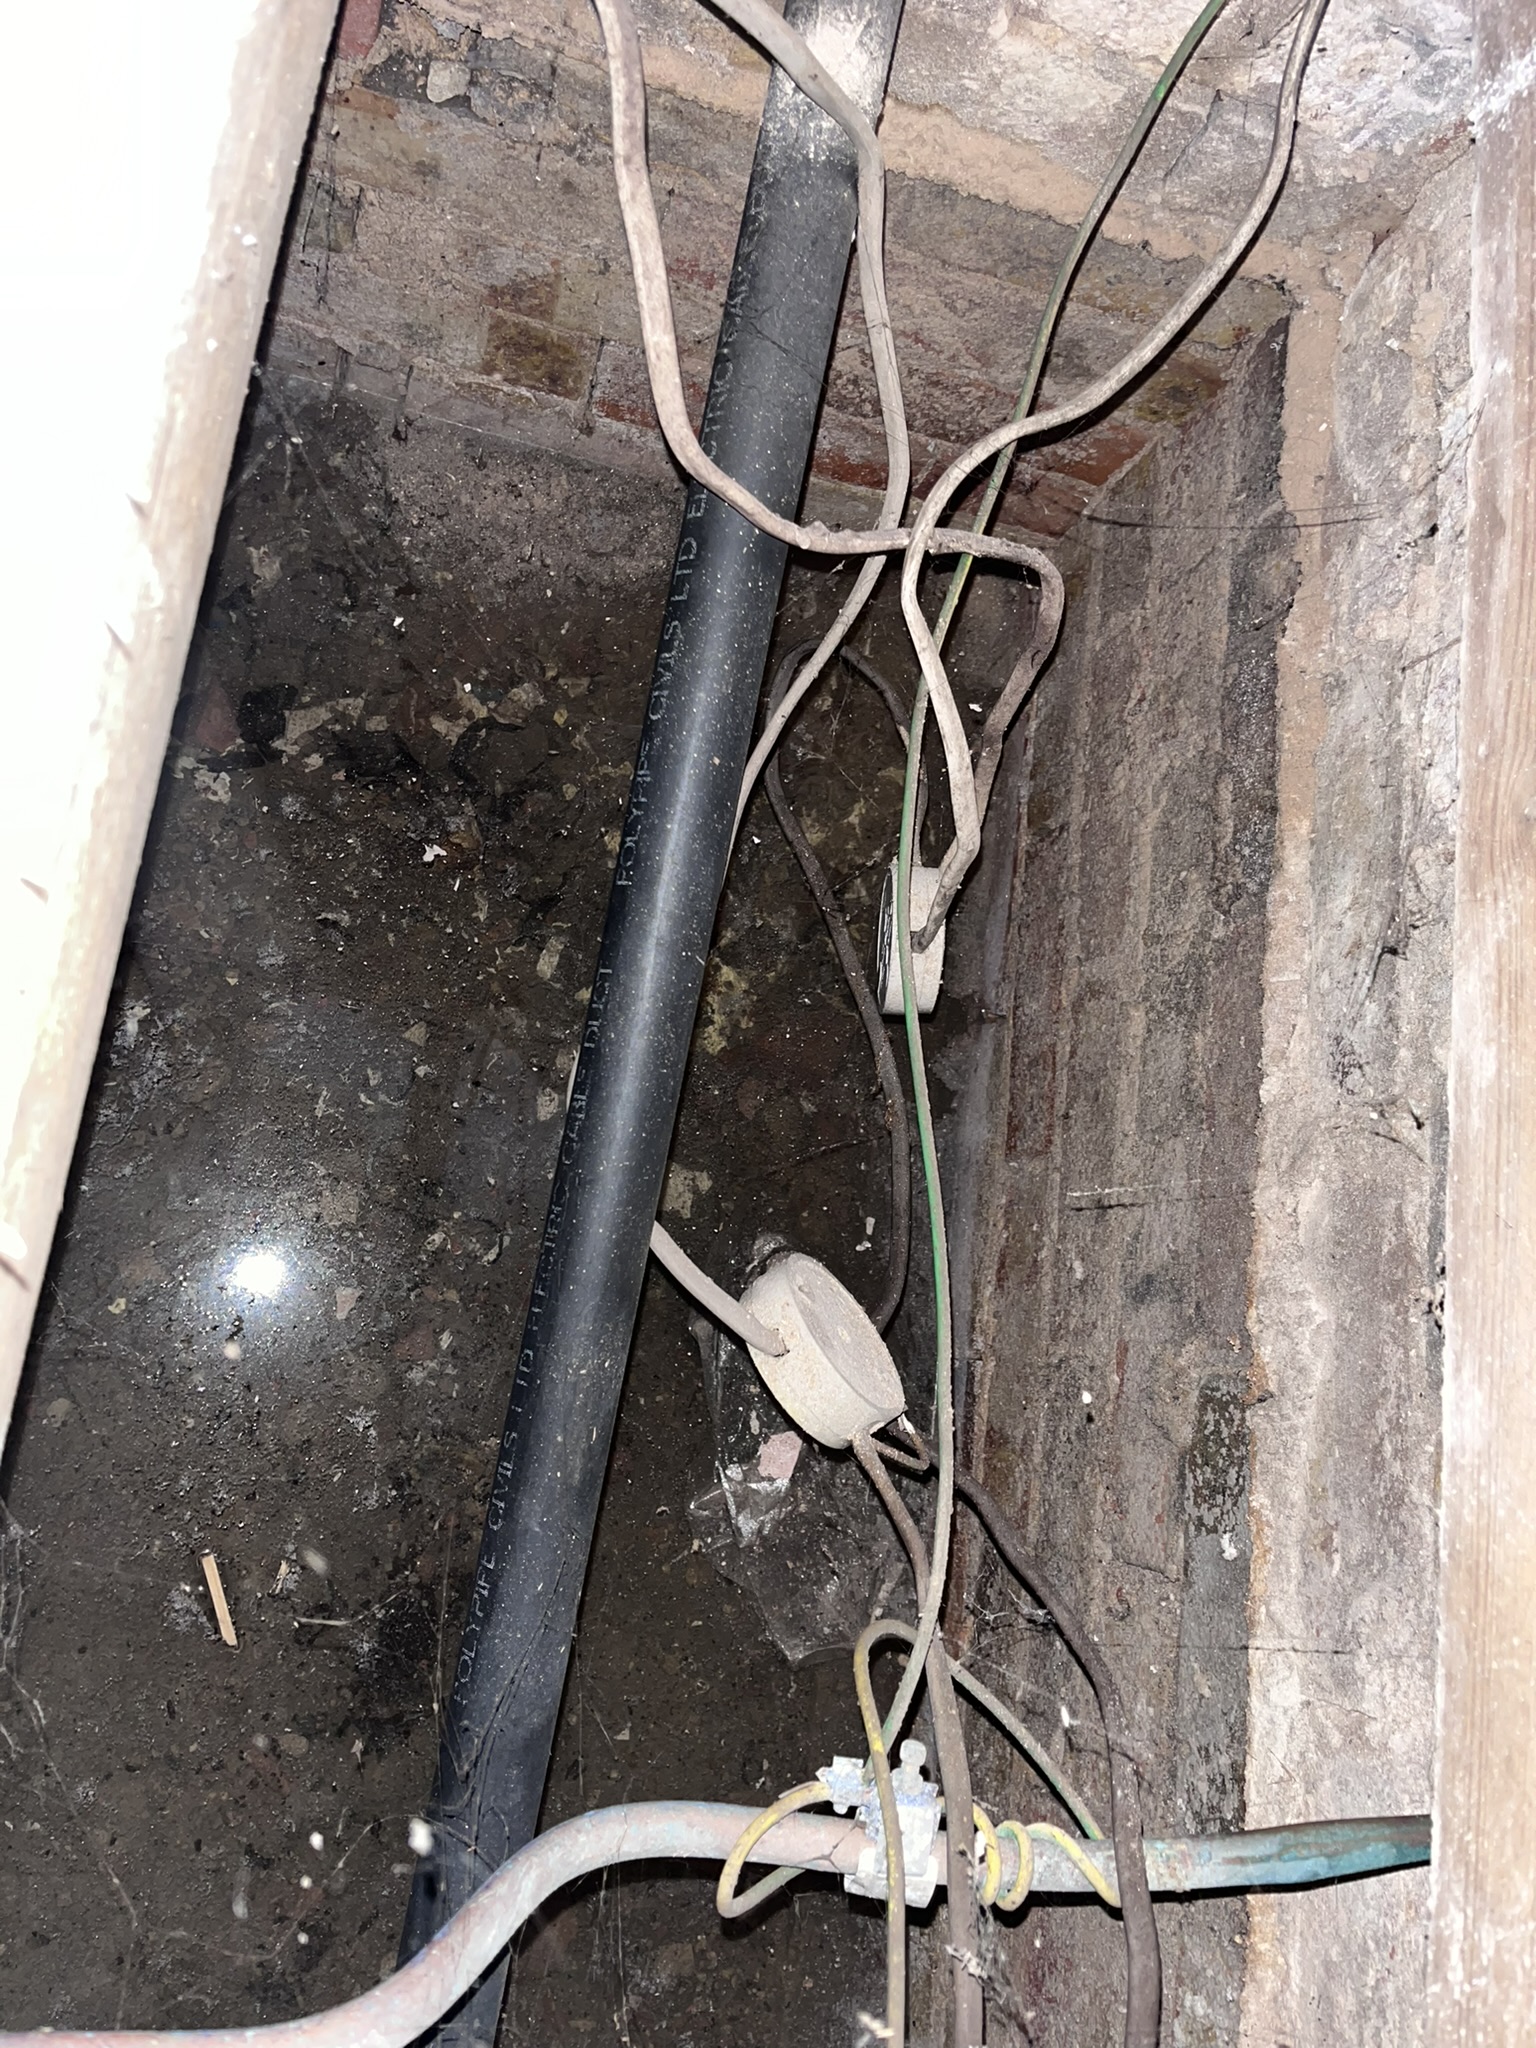 Cables loose and free to hang just inches from ground water